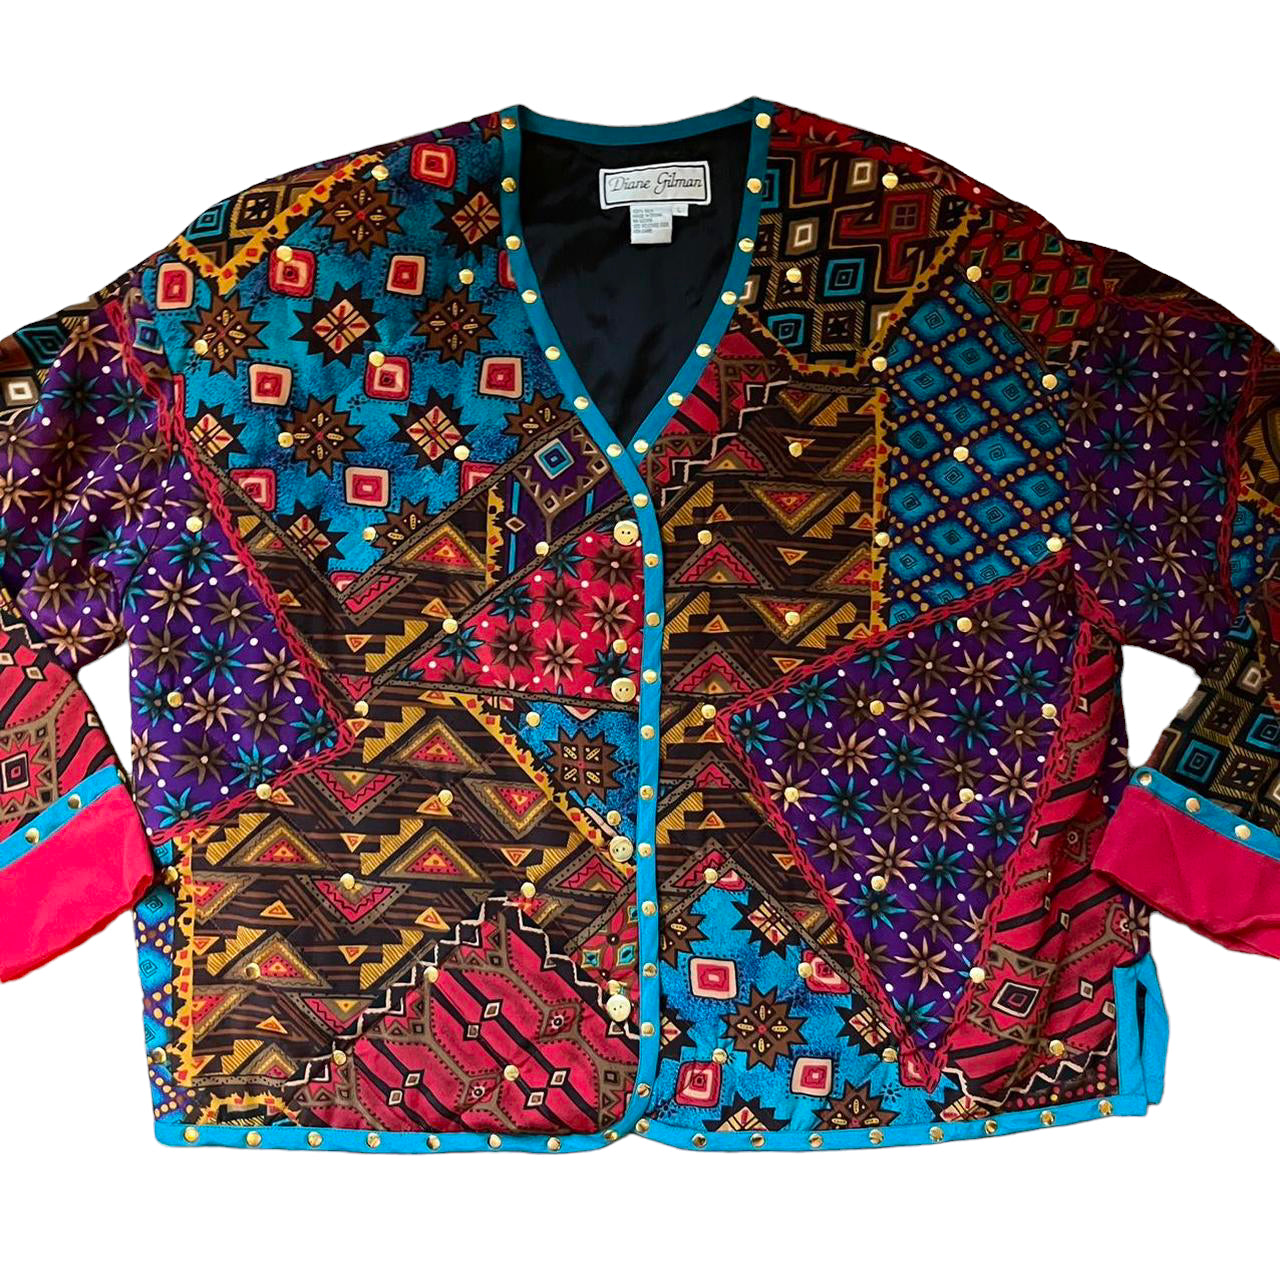 Diane Gilman Colorful Silk Quilted Jacket Size 2X